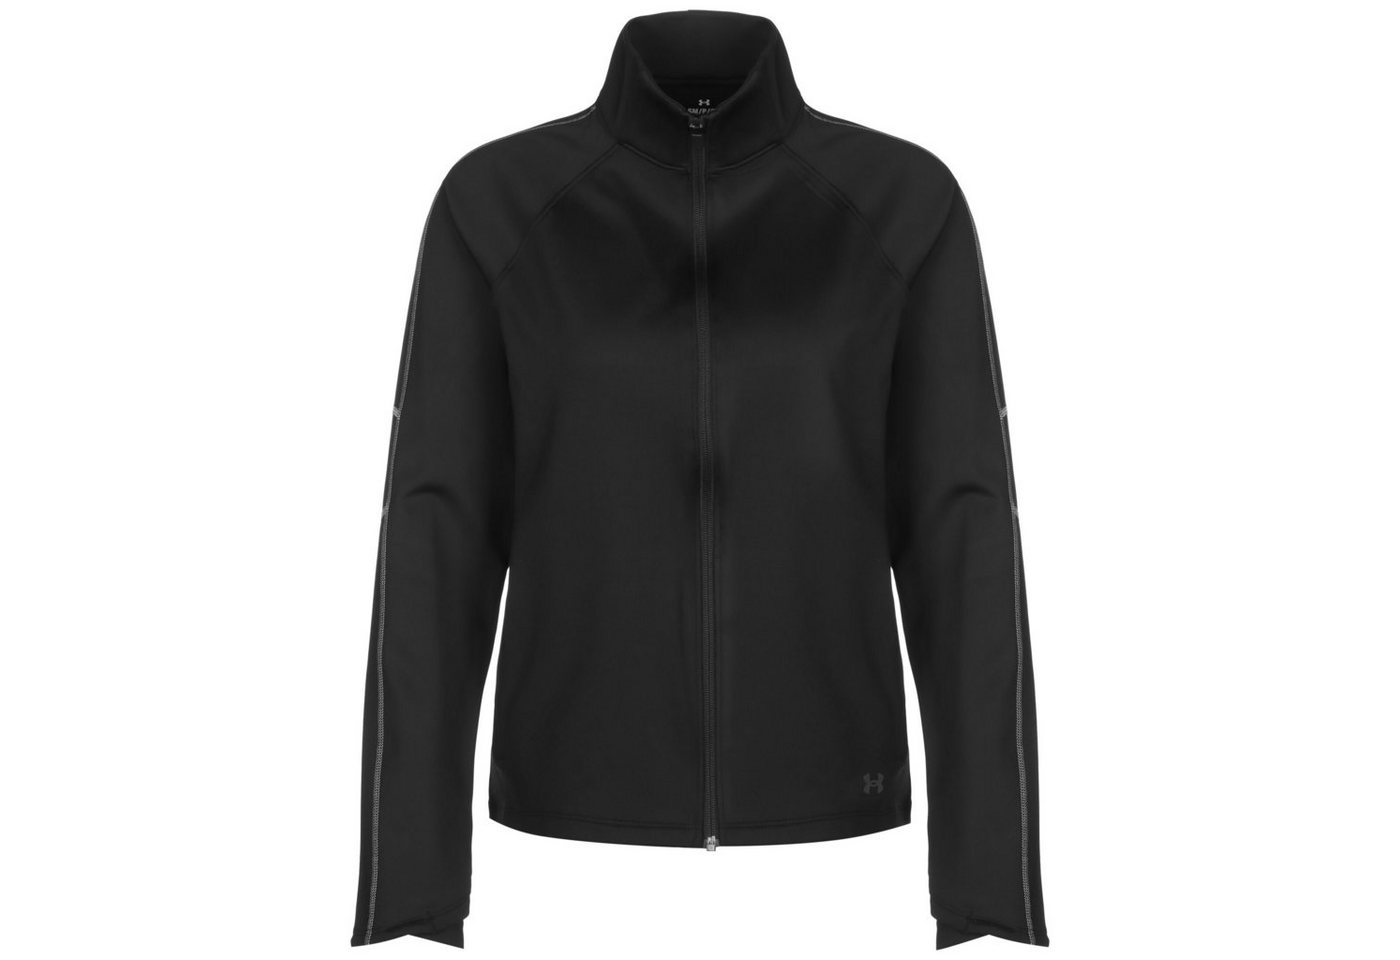 Under Armour® Trainingsjacke Train Cold Weather Trainingsjacke Damen von Under Armour®